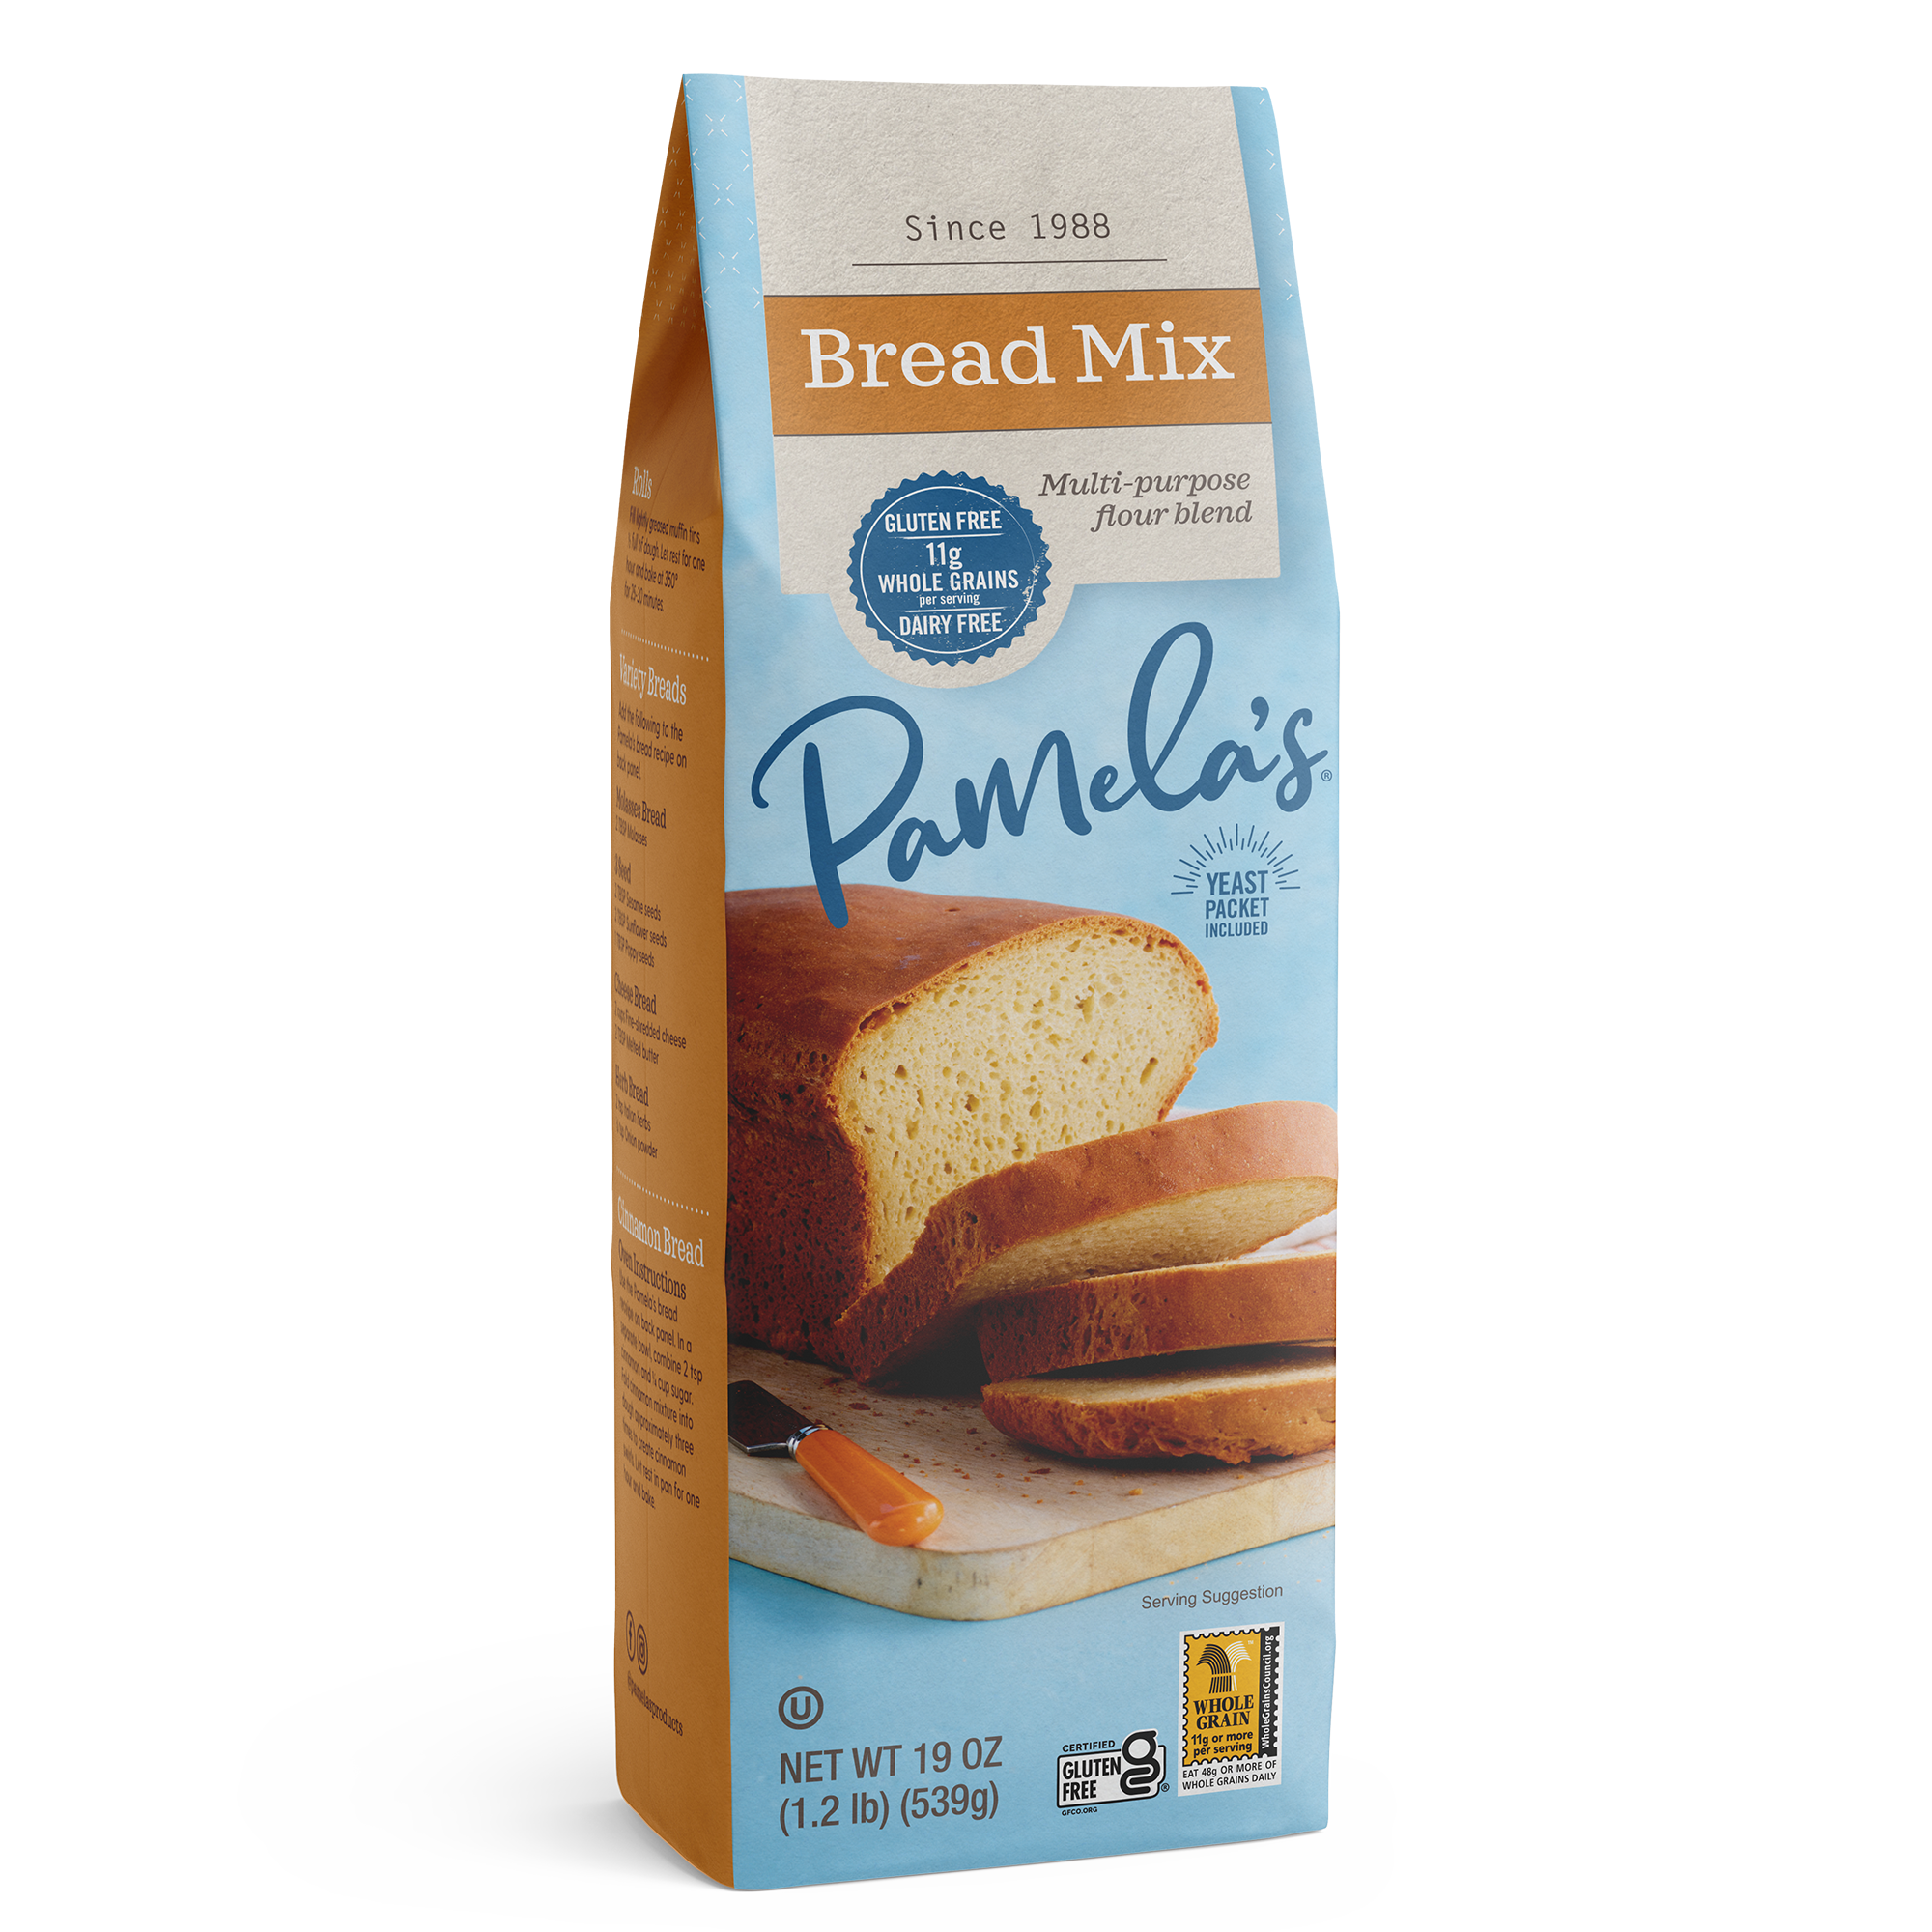 Spectacular Gluten Free Bread in the Bread Machine! xanthan free option